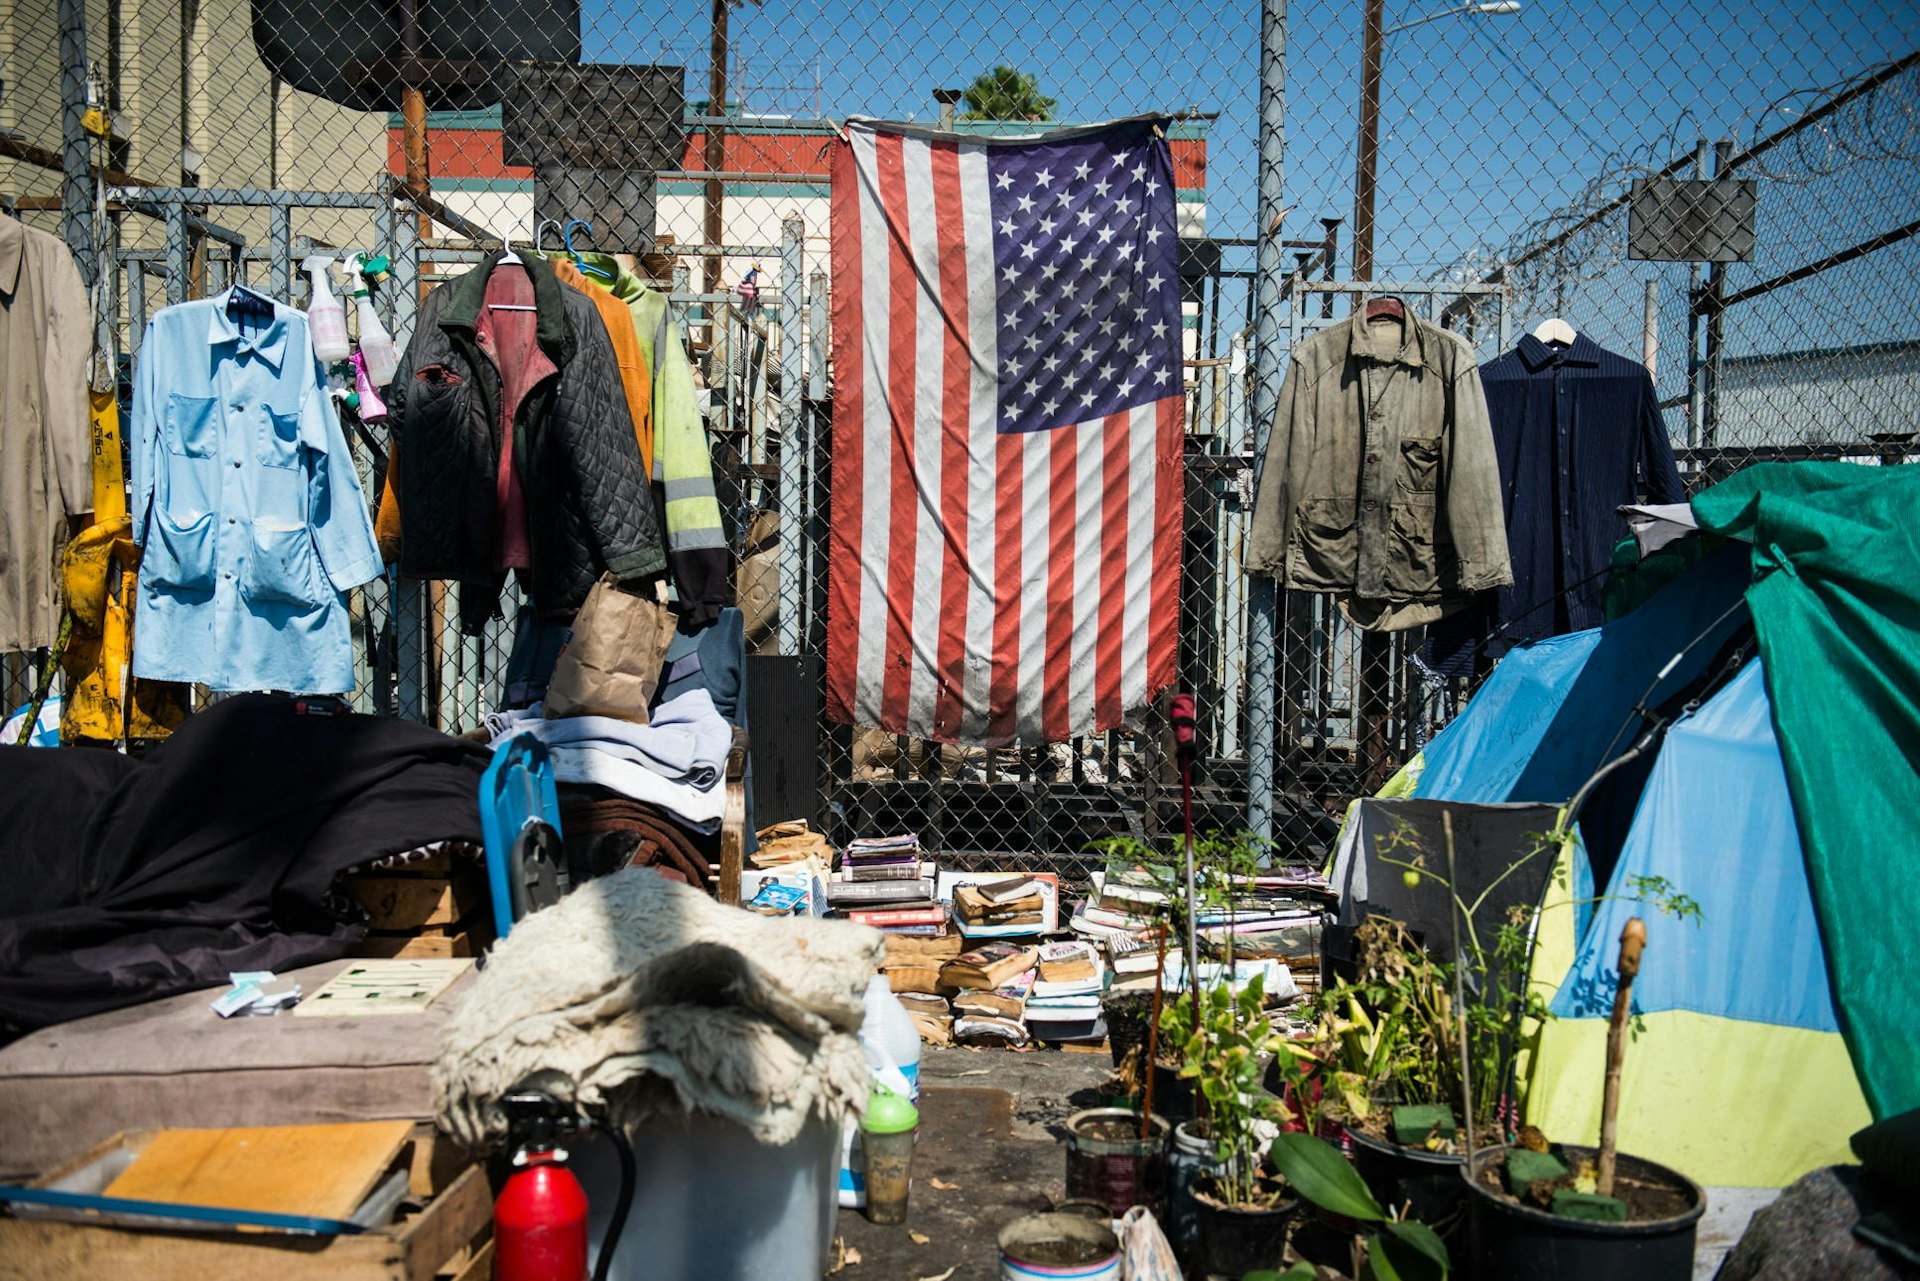 An American flag hangs in Skid Row, surrounded by clothing, books, tents and personal belongings in a homeless encampment.